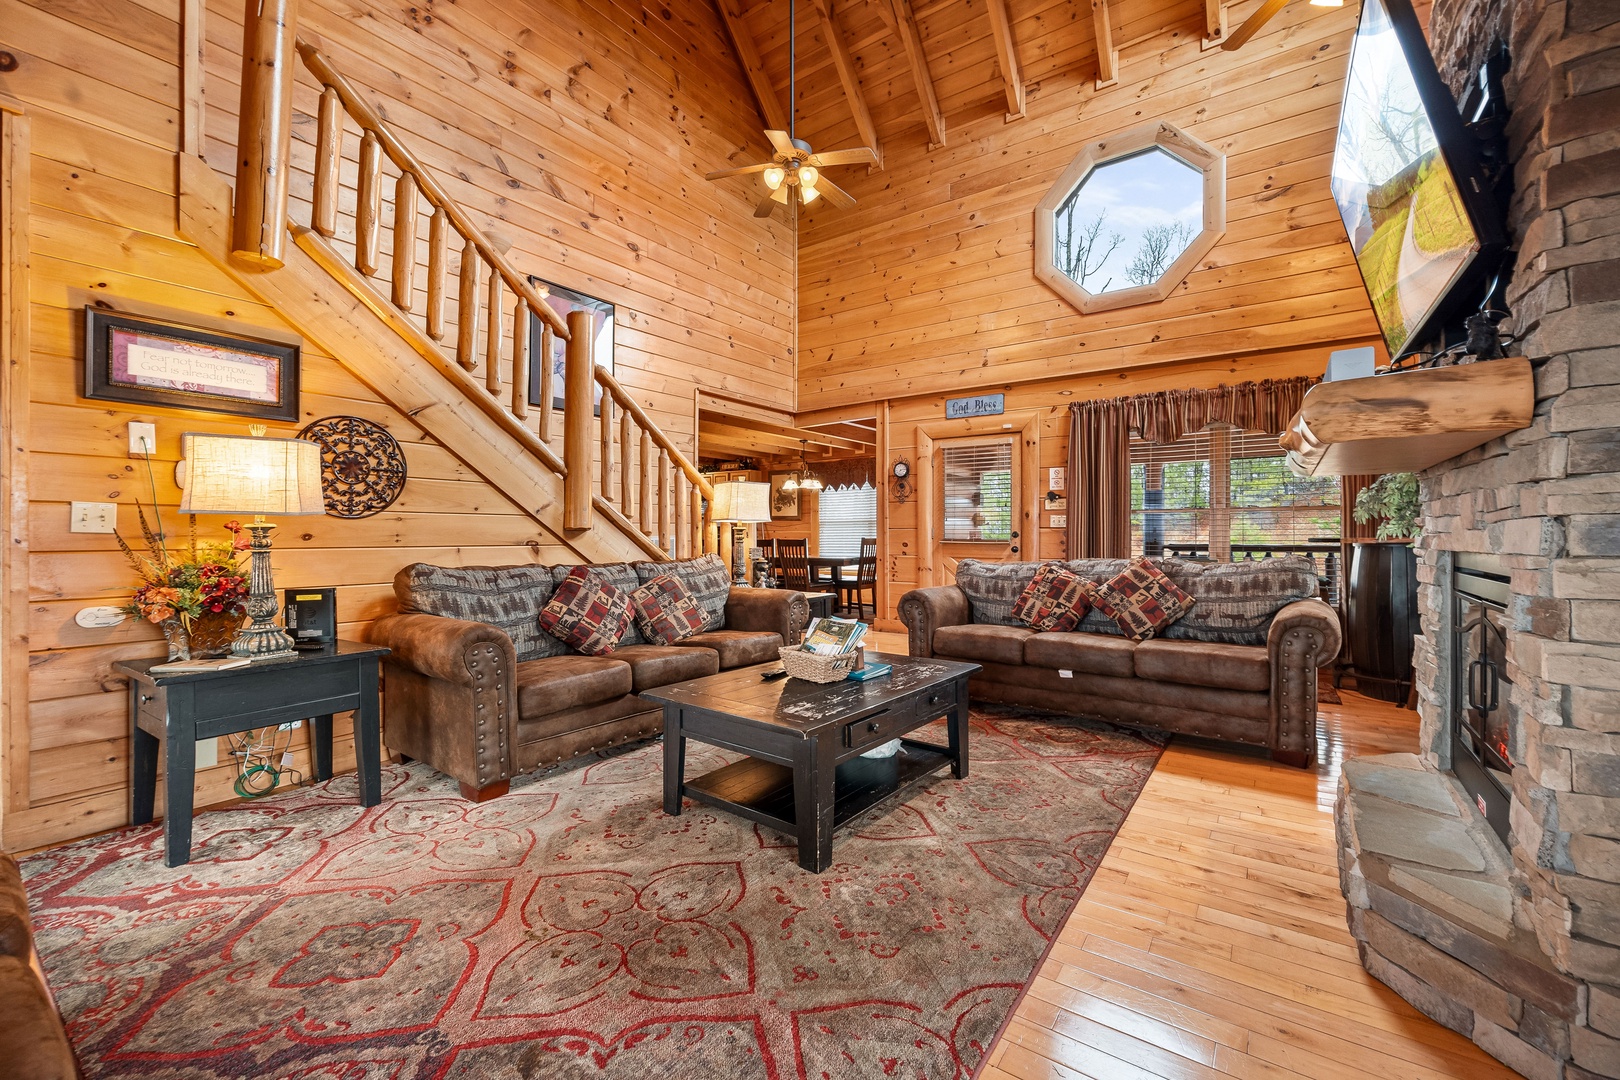 Queen sleeper sofa and additional seating in the living room at Better View, a 4 bedroom cabin rental located in Pigeon Forge